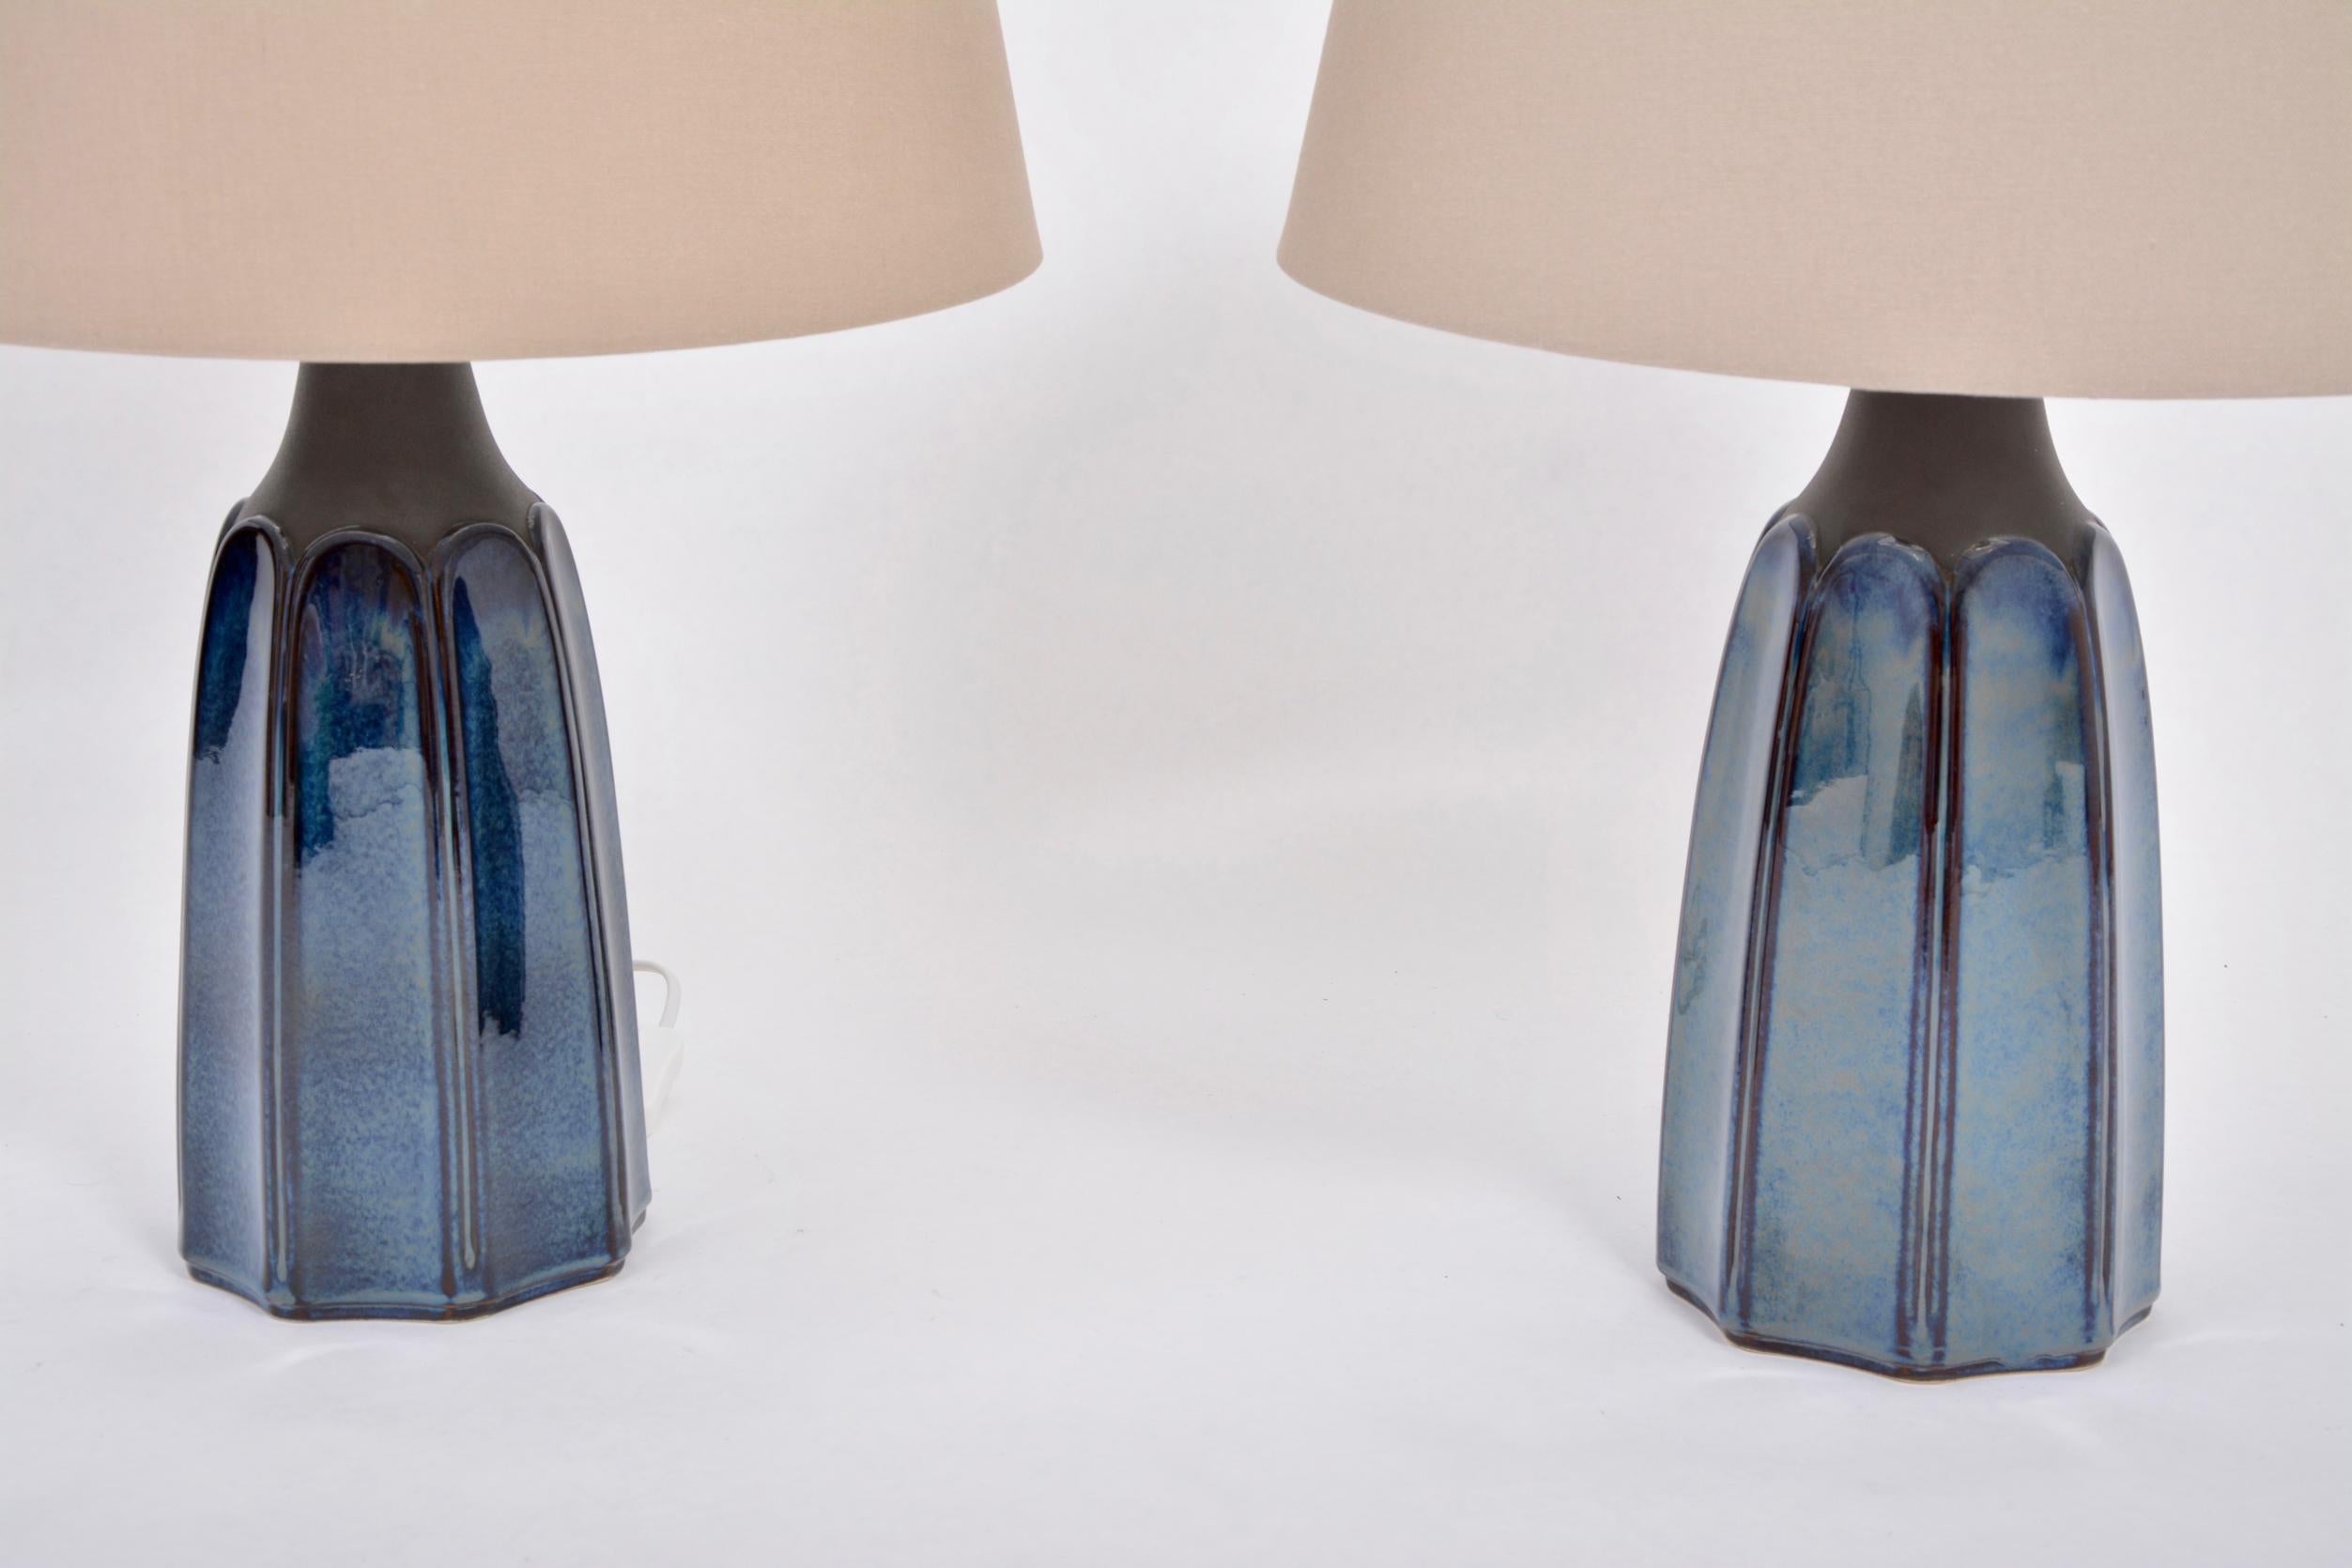 Pair of tall blue stoneware table lamps model 1042 by Einar Johansen for Søholm

Pair of table lamps made of stoneware with blue ceramic glazing to the base of the lamps. Designed by Einar Johansen and produced by Danish company Soholm. The lamps